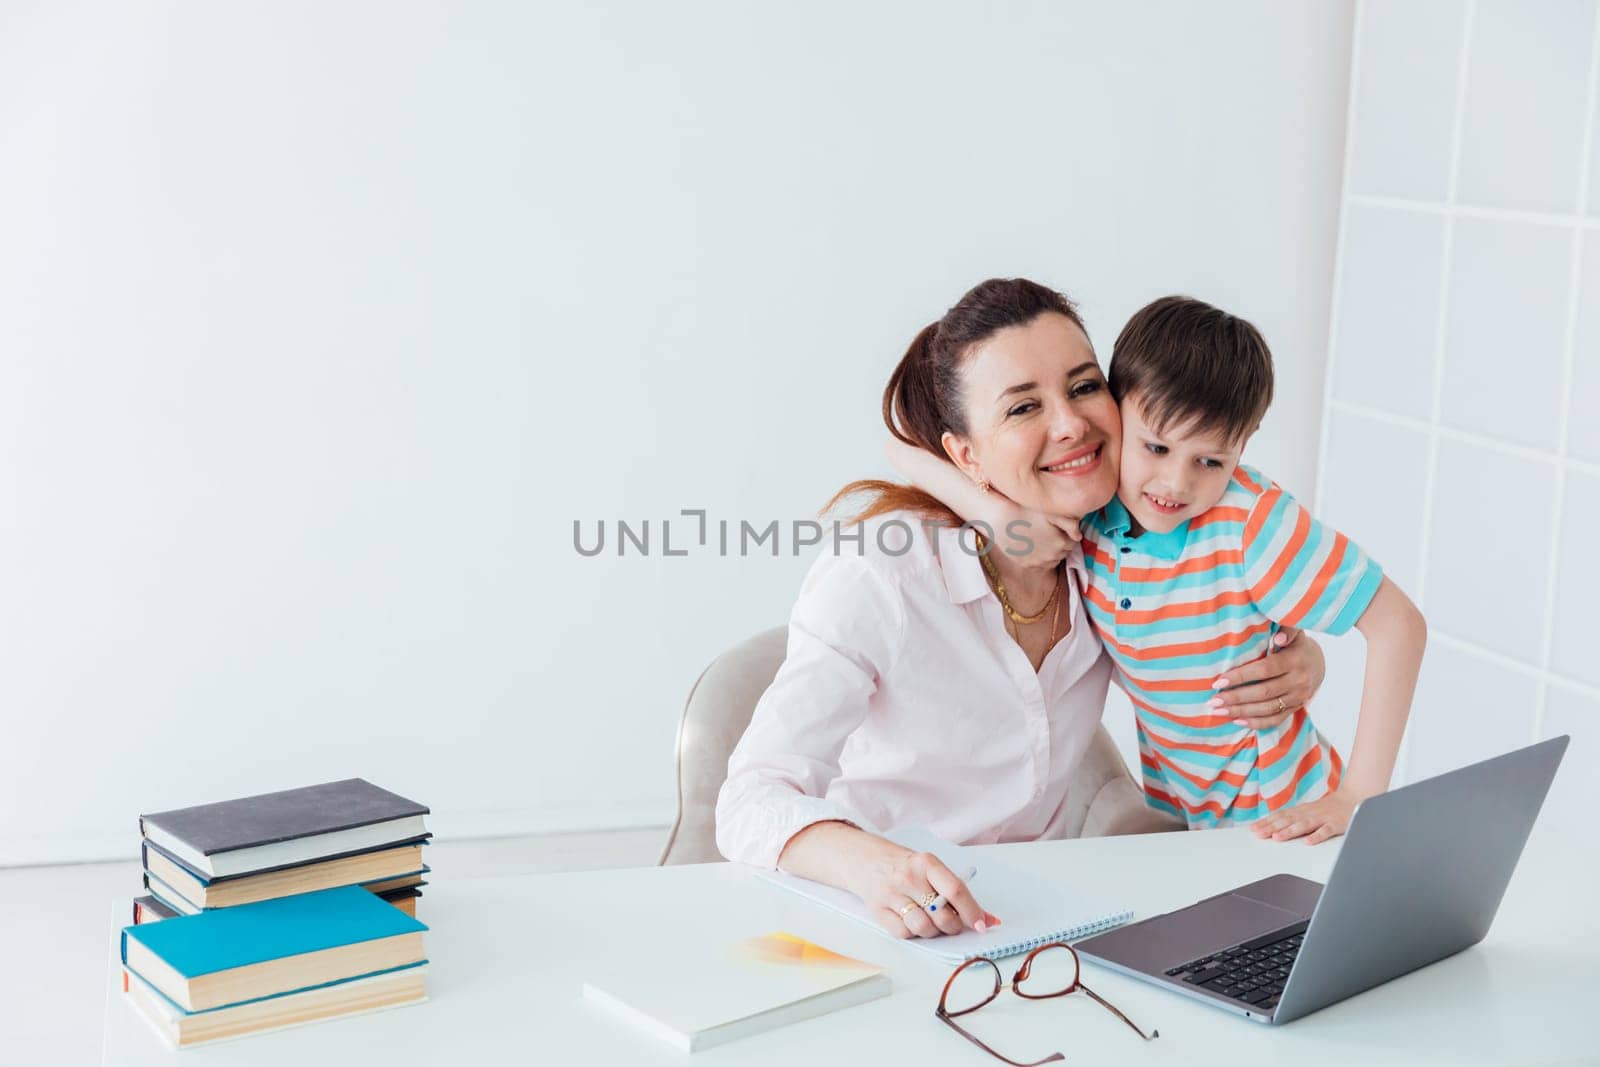 Woman with boy playing laptop online by Simakov